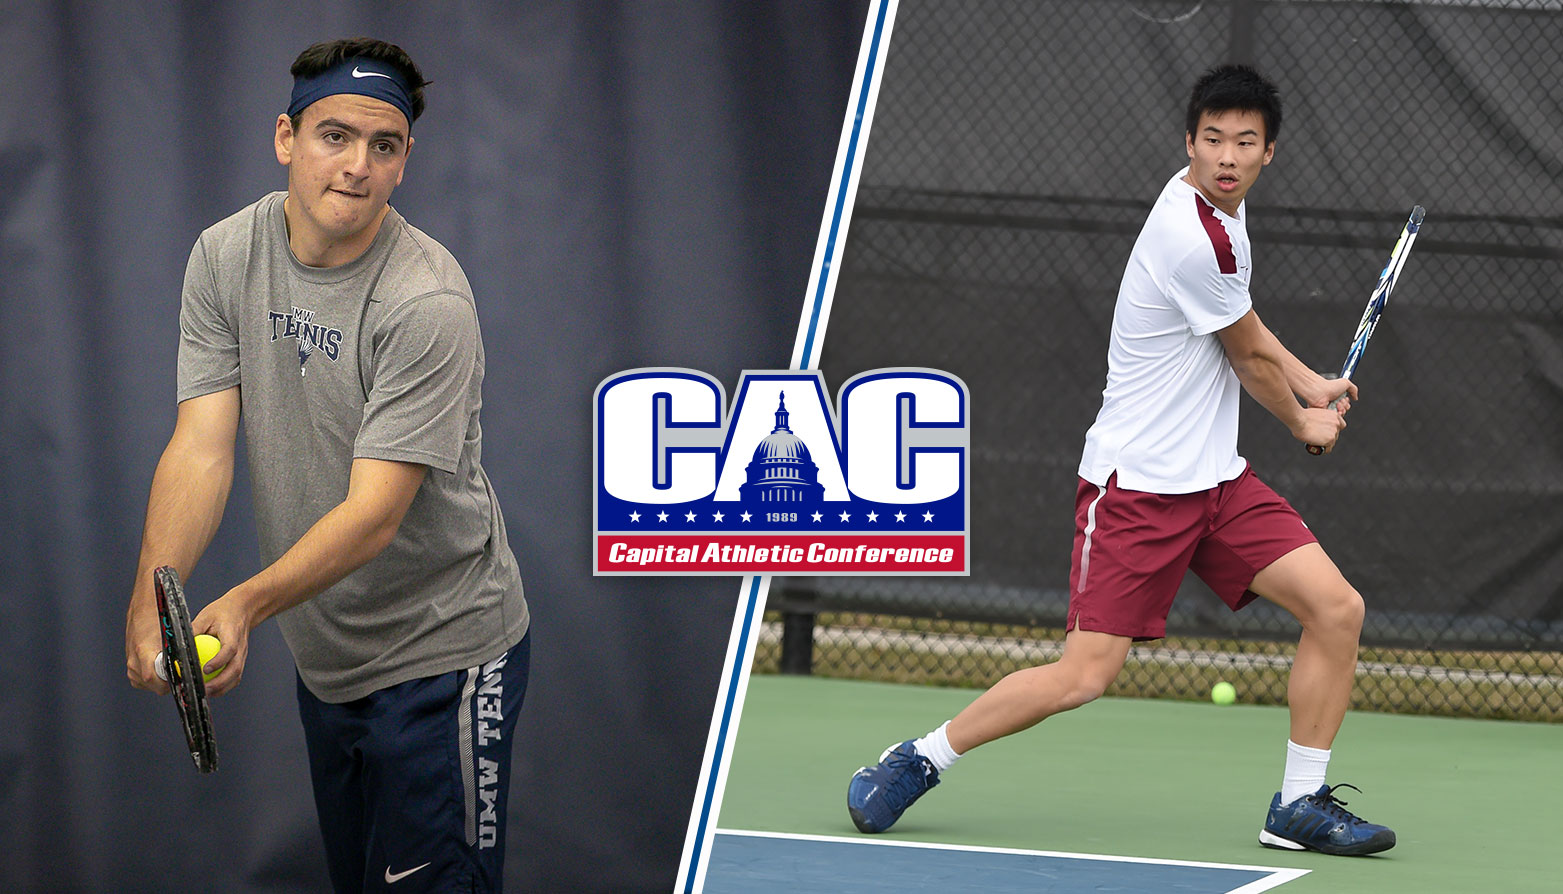 Mary Washington Claims No. 1 Seed in CAC Tournament for 11th Straight Season; CAC Men's Tennis Tournament Matchups Set